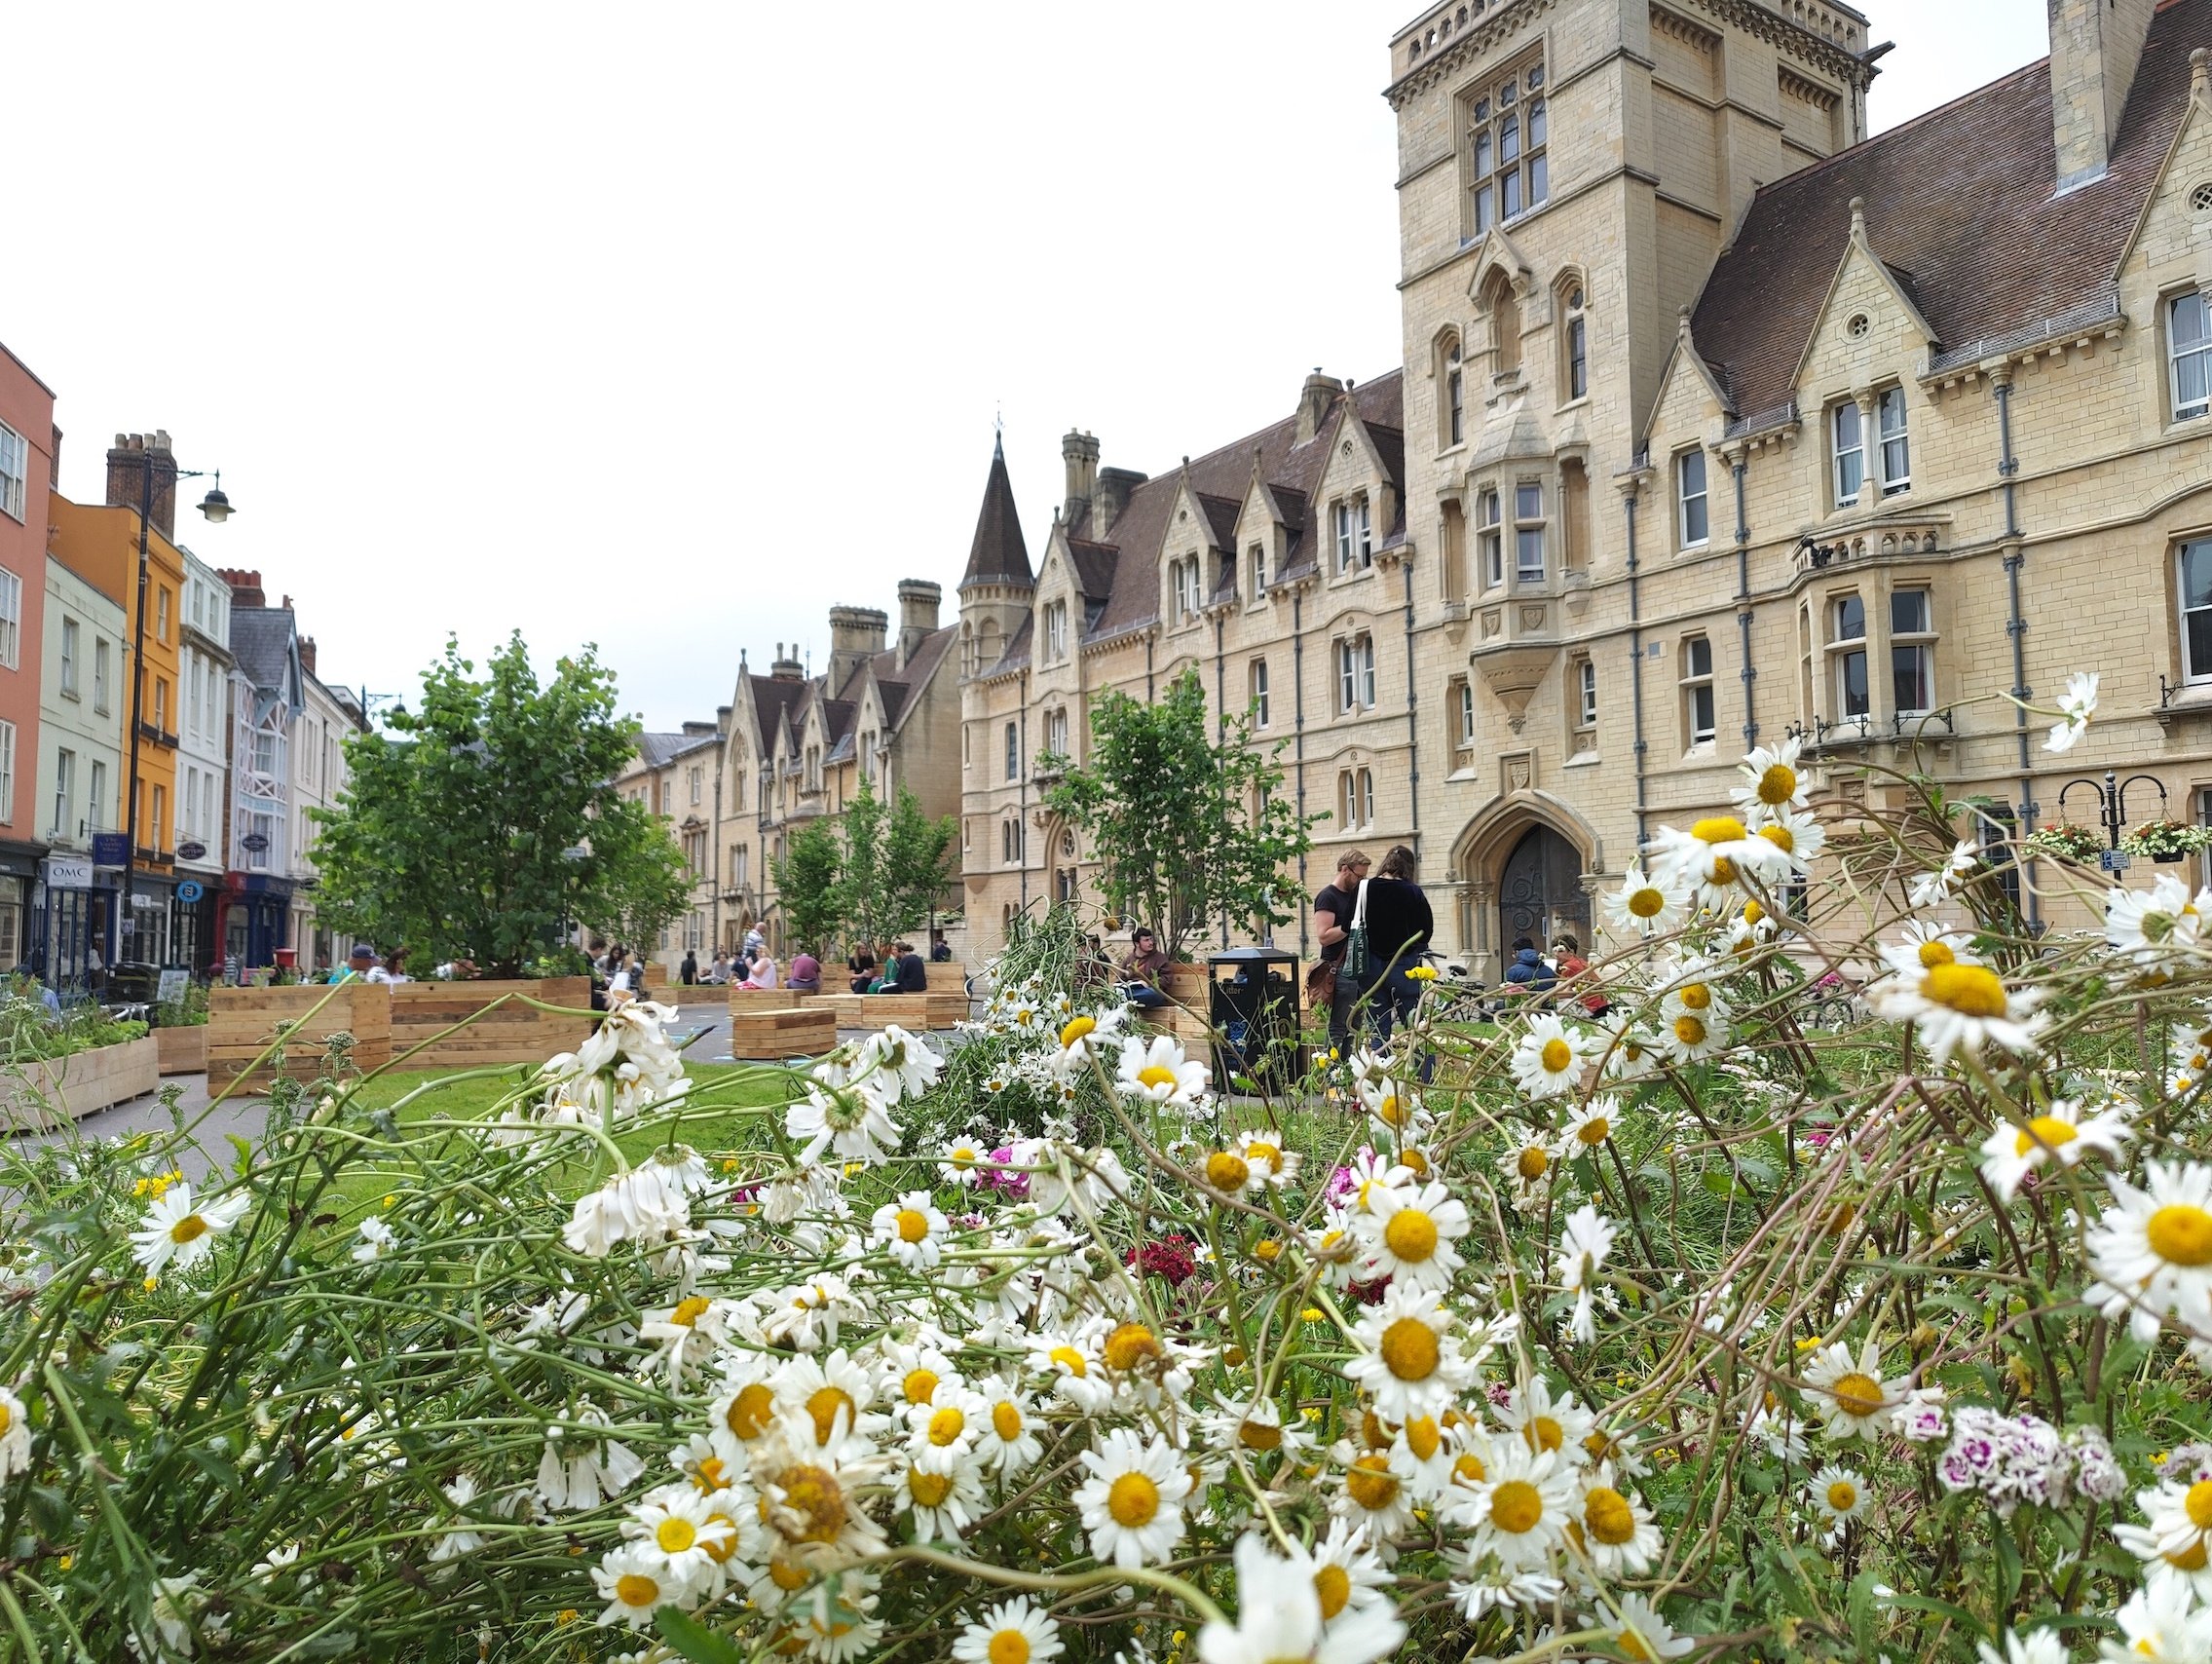 Flowers in front of Balliol College